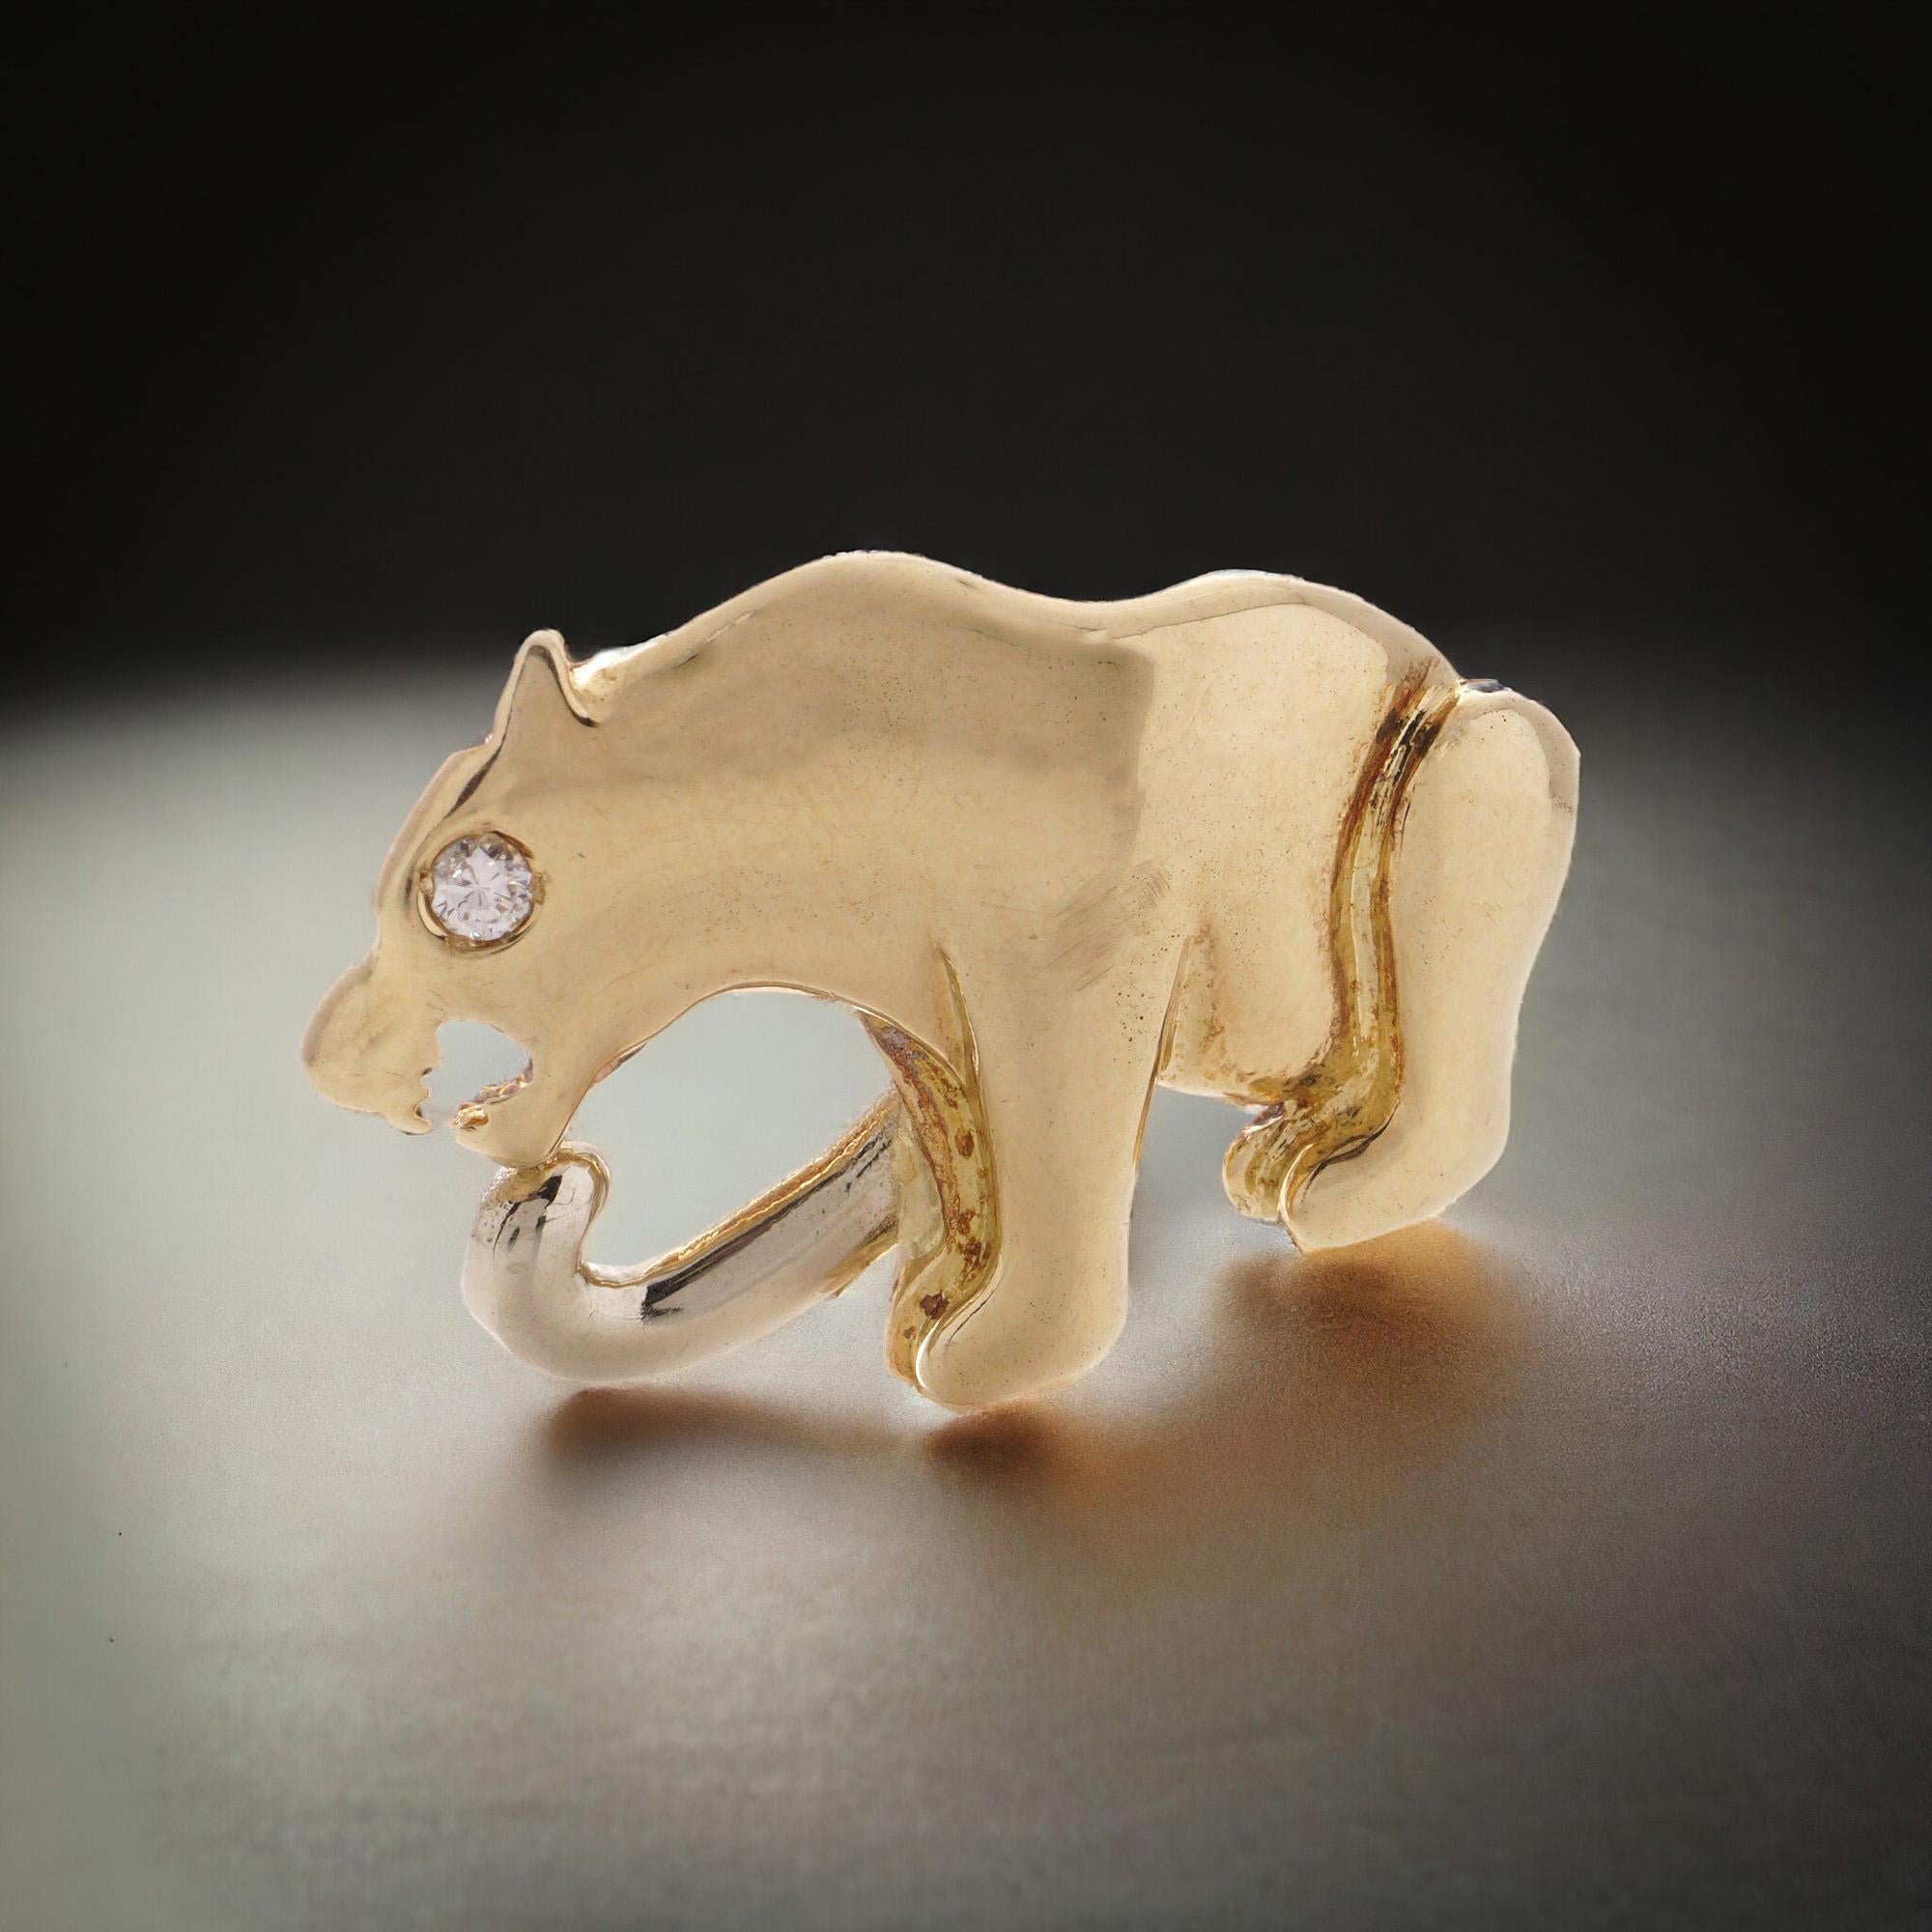 18kt. Yellow Gold Sitting Panther Brooch with Diamond Eye. 
Stamped with 750 Hallmark on a pin hinge. 

Dimensions:
Length x height: 2.7 x 1.8 cm 
Weight: 5.1 grams

Diamond - 
Cut: Brilliant 
Quantity: 1 
Total carat weight: 0.04 cts. 
Colour: G